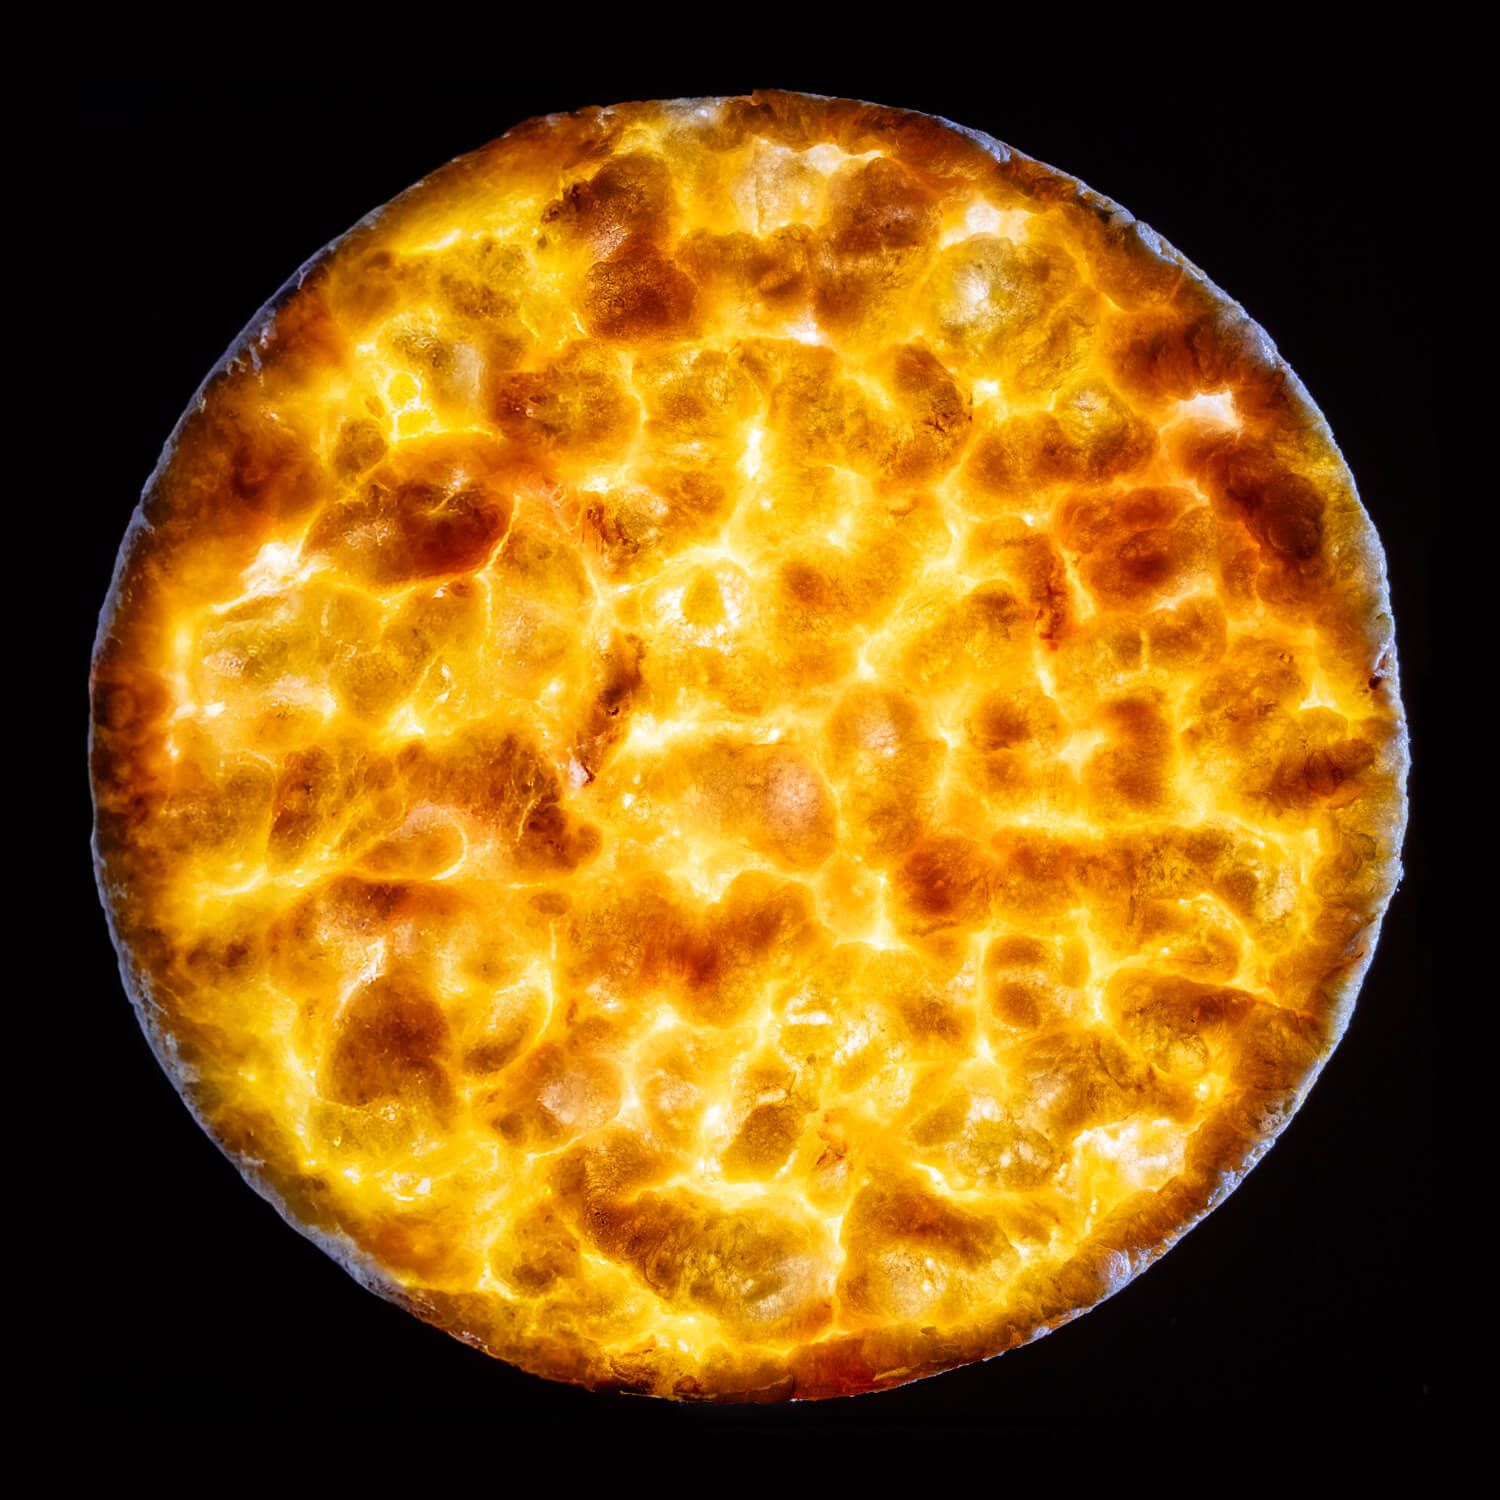 The image showcases a close-up of a round, golden rice cracker back lit against a dark background, highlighting the textures and vibrant colours of the crust. The surface appears bubbly and crisp, indicative of a flaky or cheesy top that's been browned to perfection, and also reminiscent for the surface of the moon.